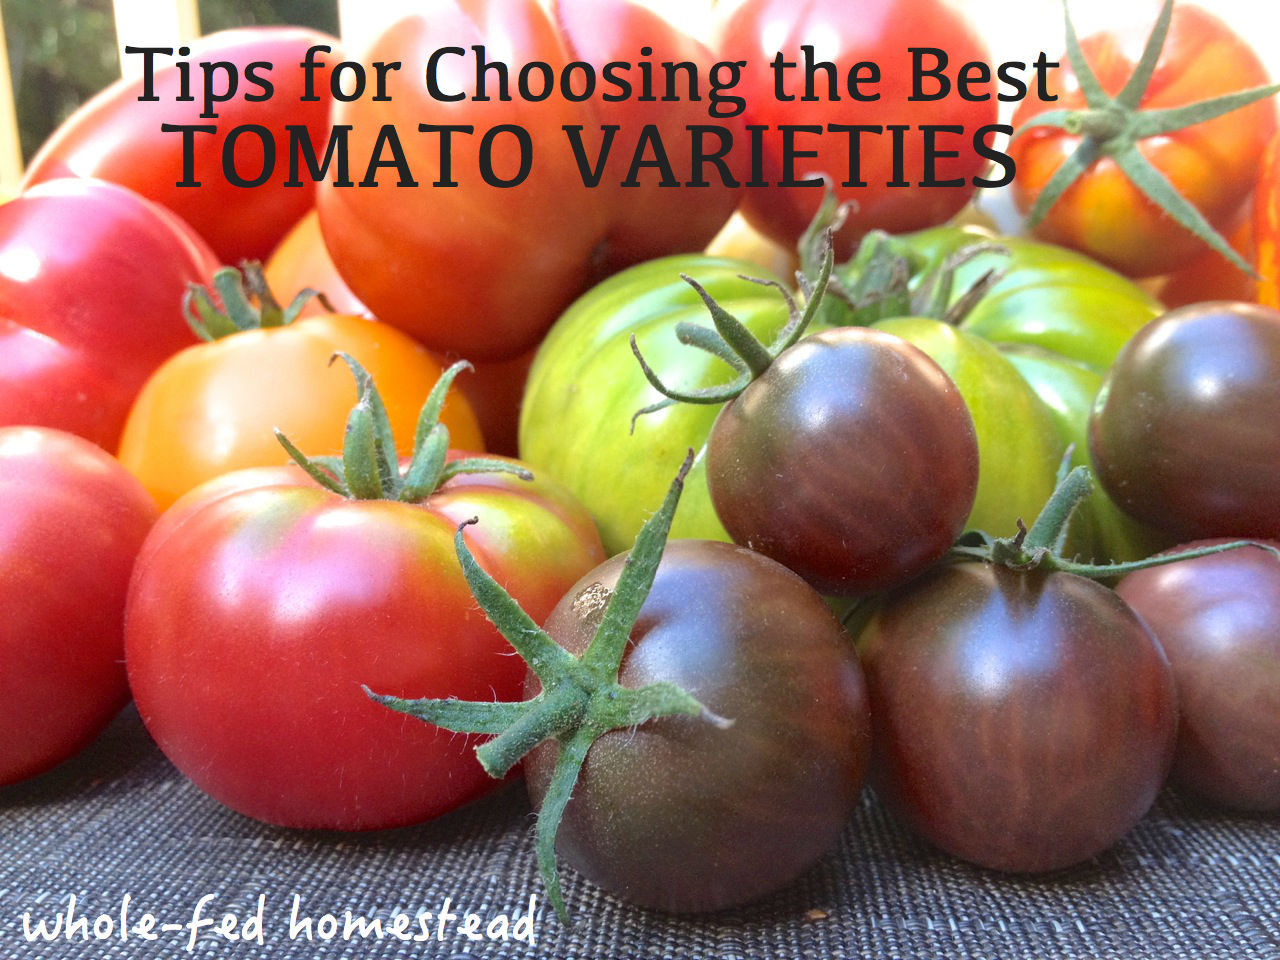 Tips for Growing Tomatoes and Selecting Varieties for Sauce, Paste, Salsa, & Juice